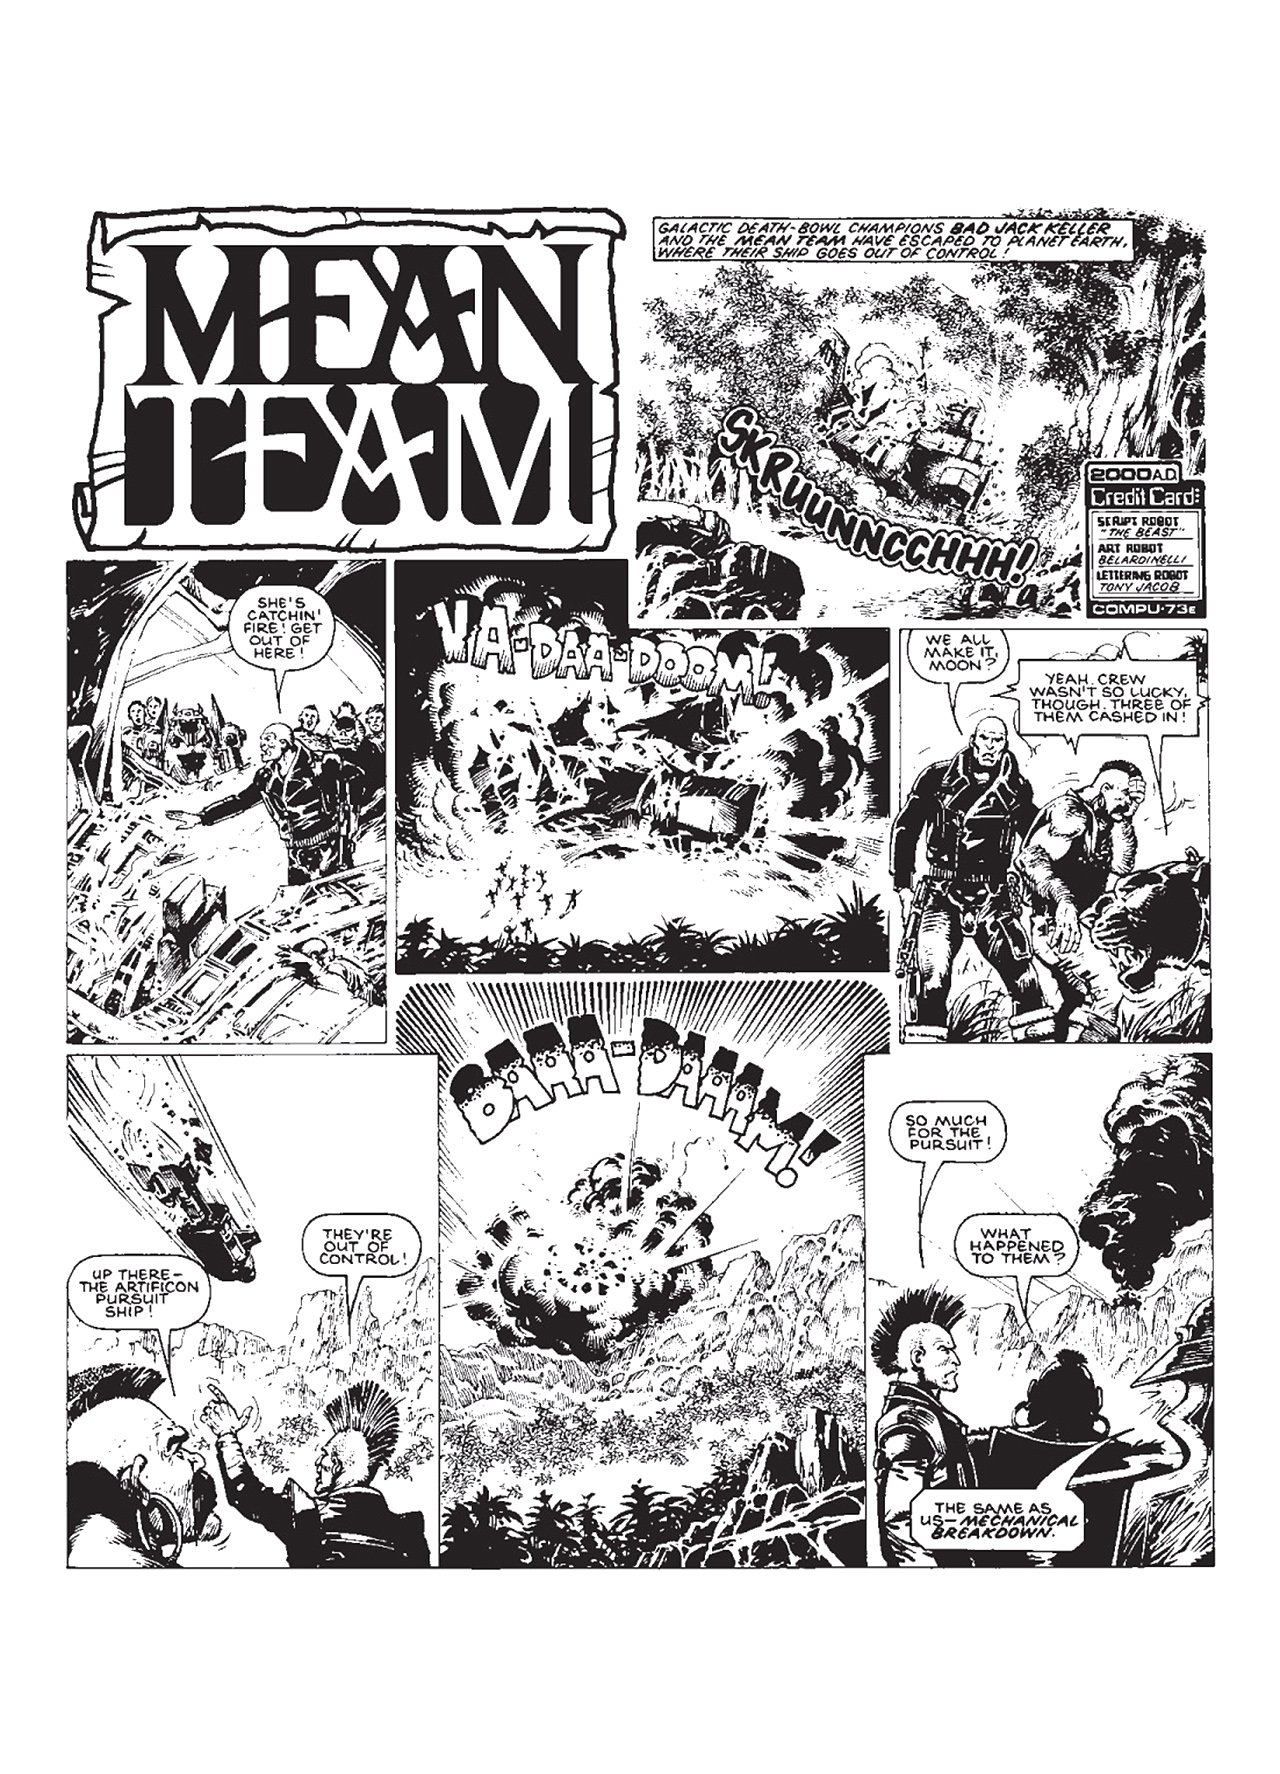 Read online Mean Team comic -  Issue # TPB - 55